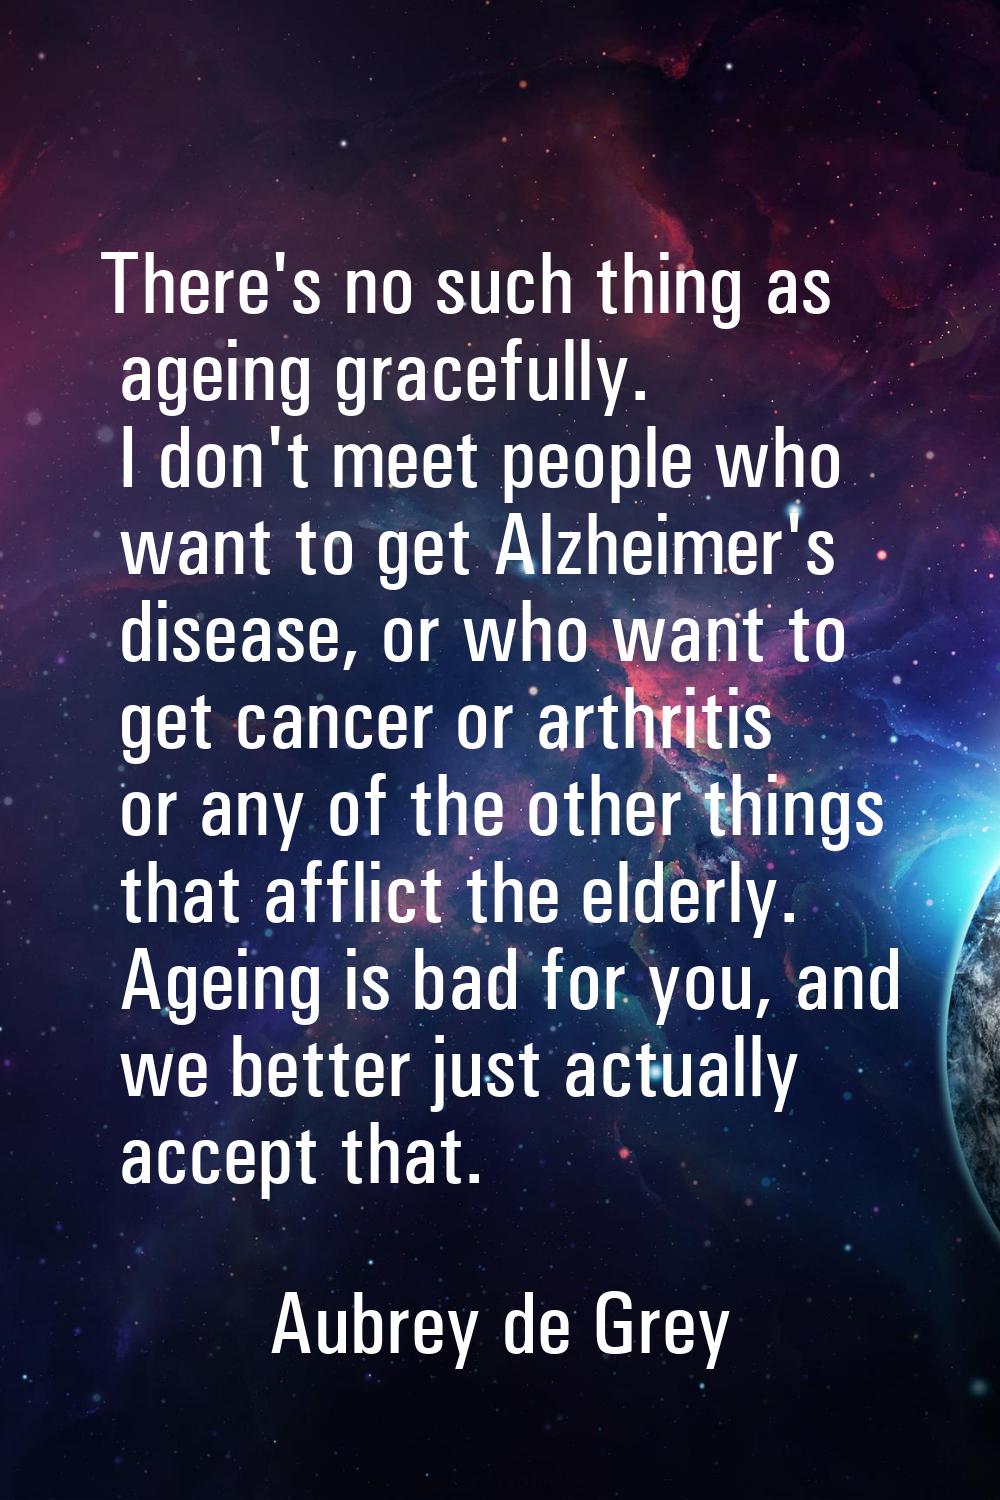 There's no such thing as ageing gracefully. I don't meet people who want to get Alzheimer's disease